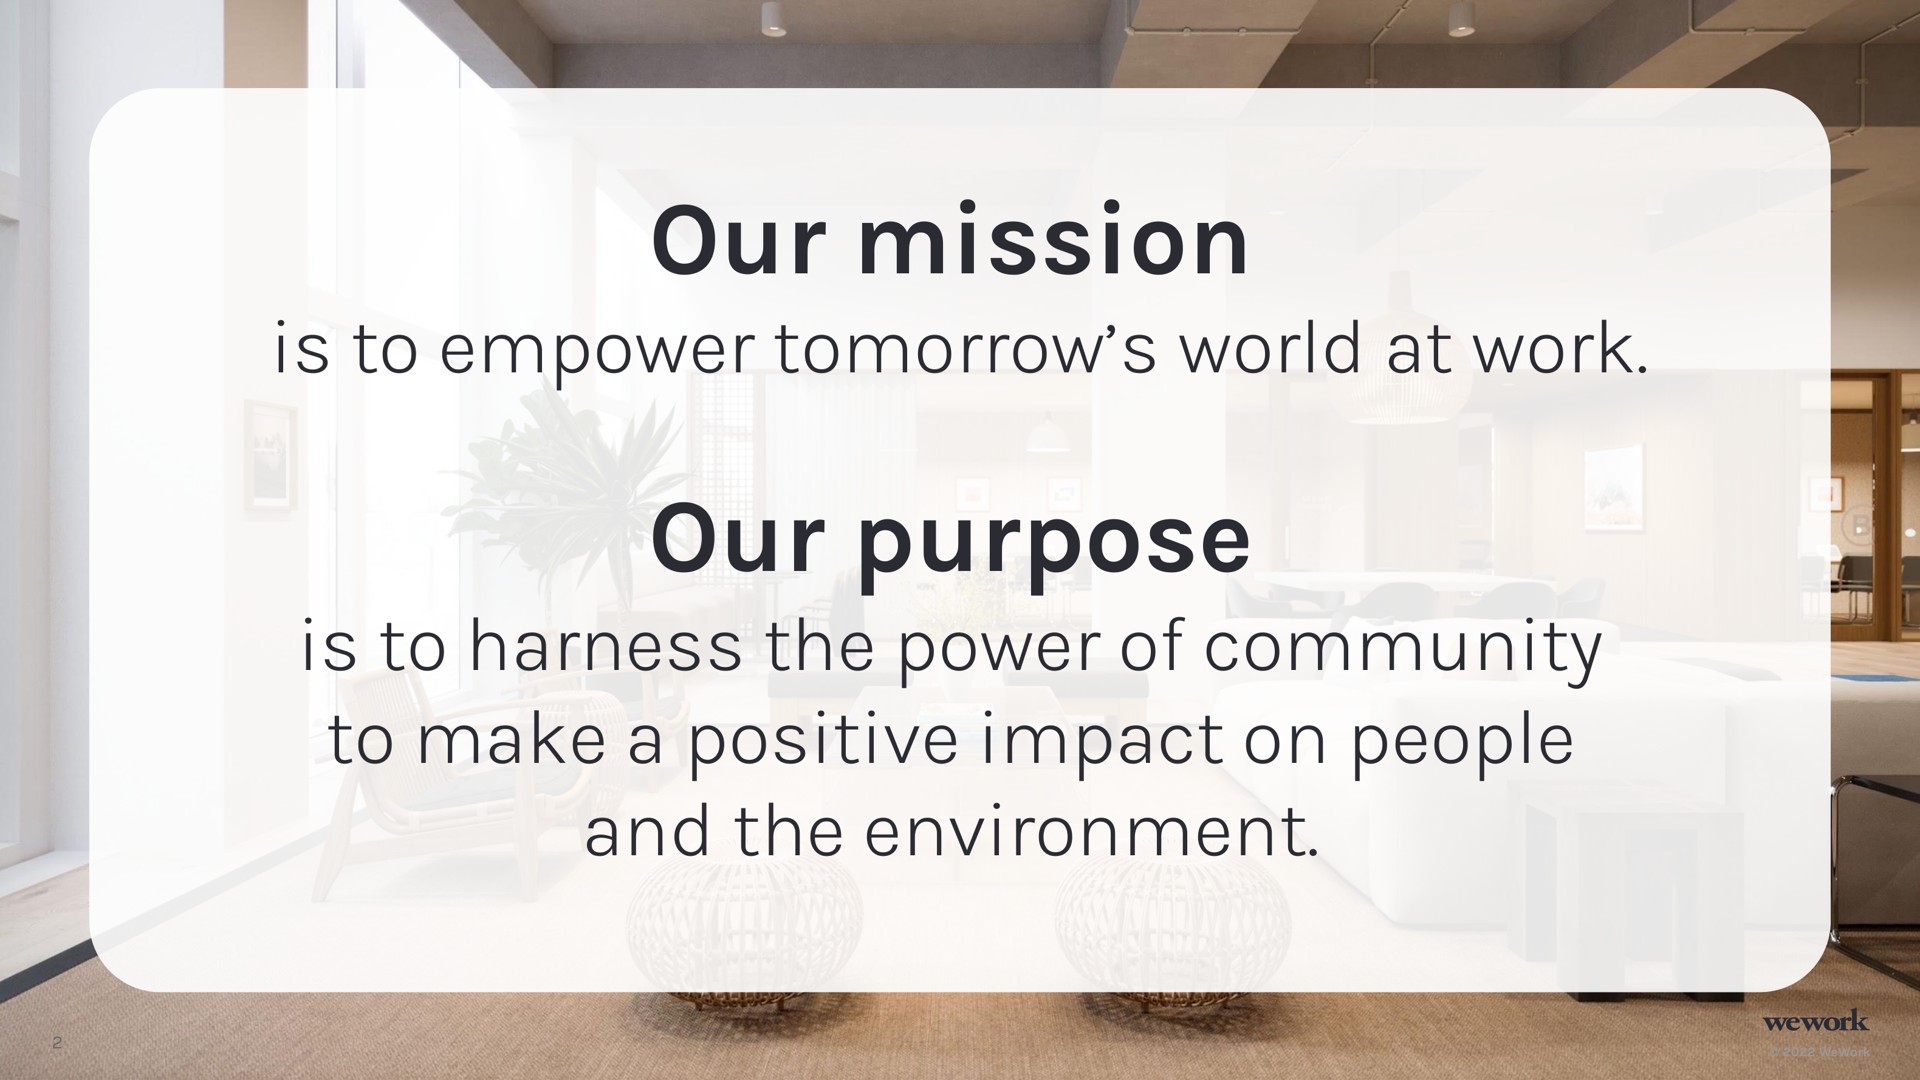 our mission is to empower tomorrow world at work our purpose is to harness the power of community to make a positive impact on people and the environment | WeWork